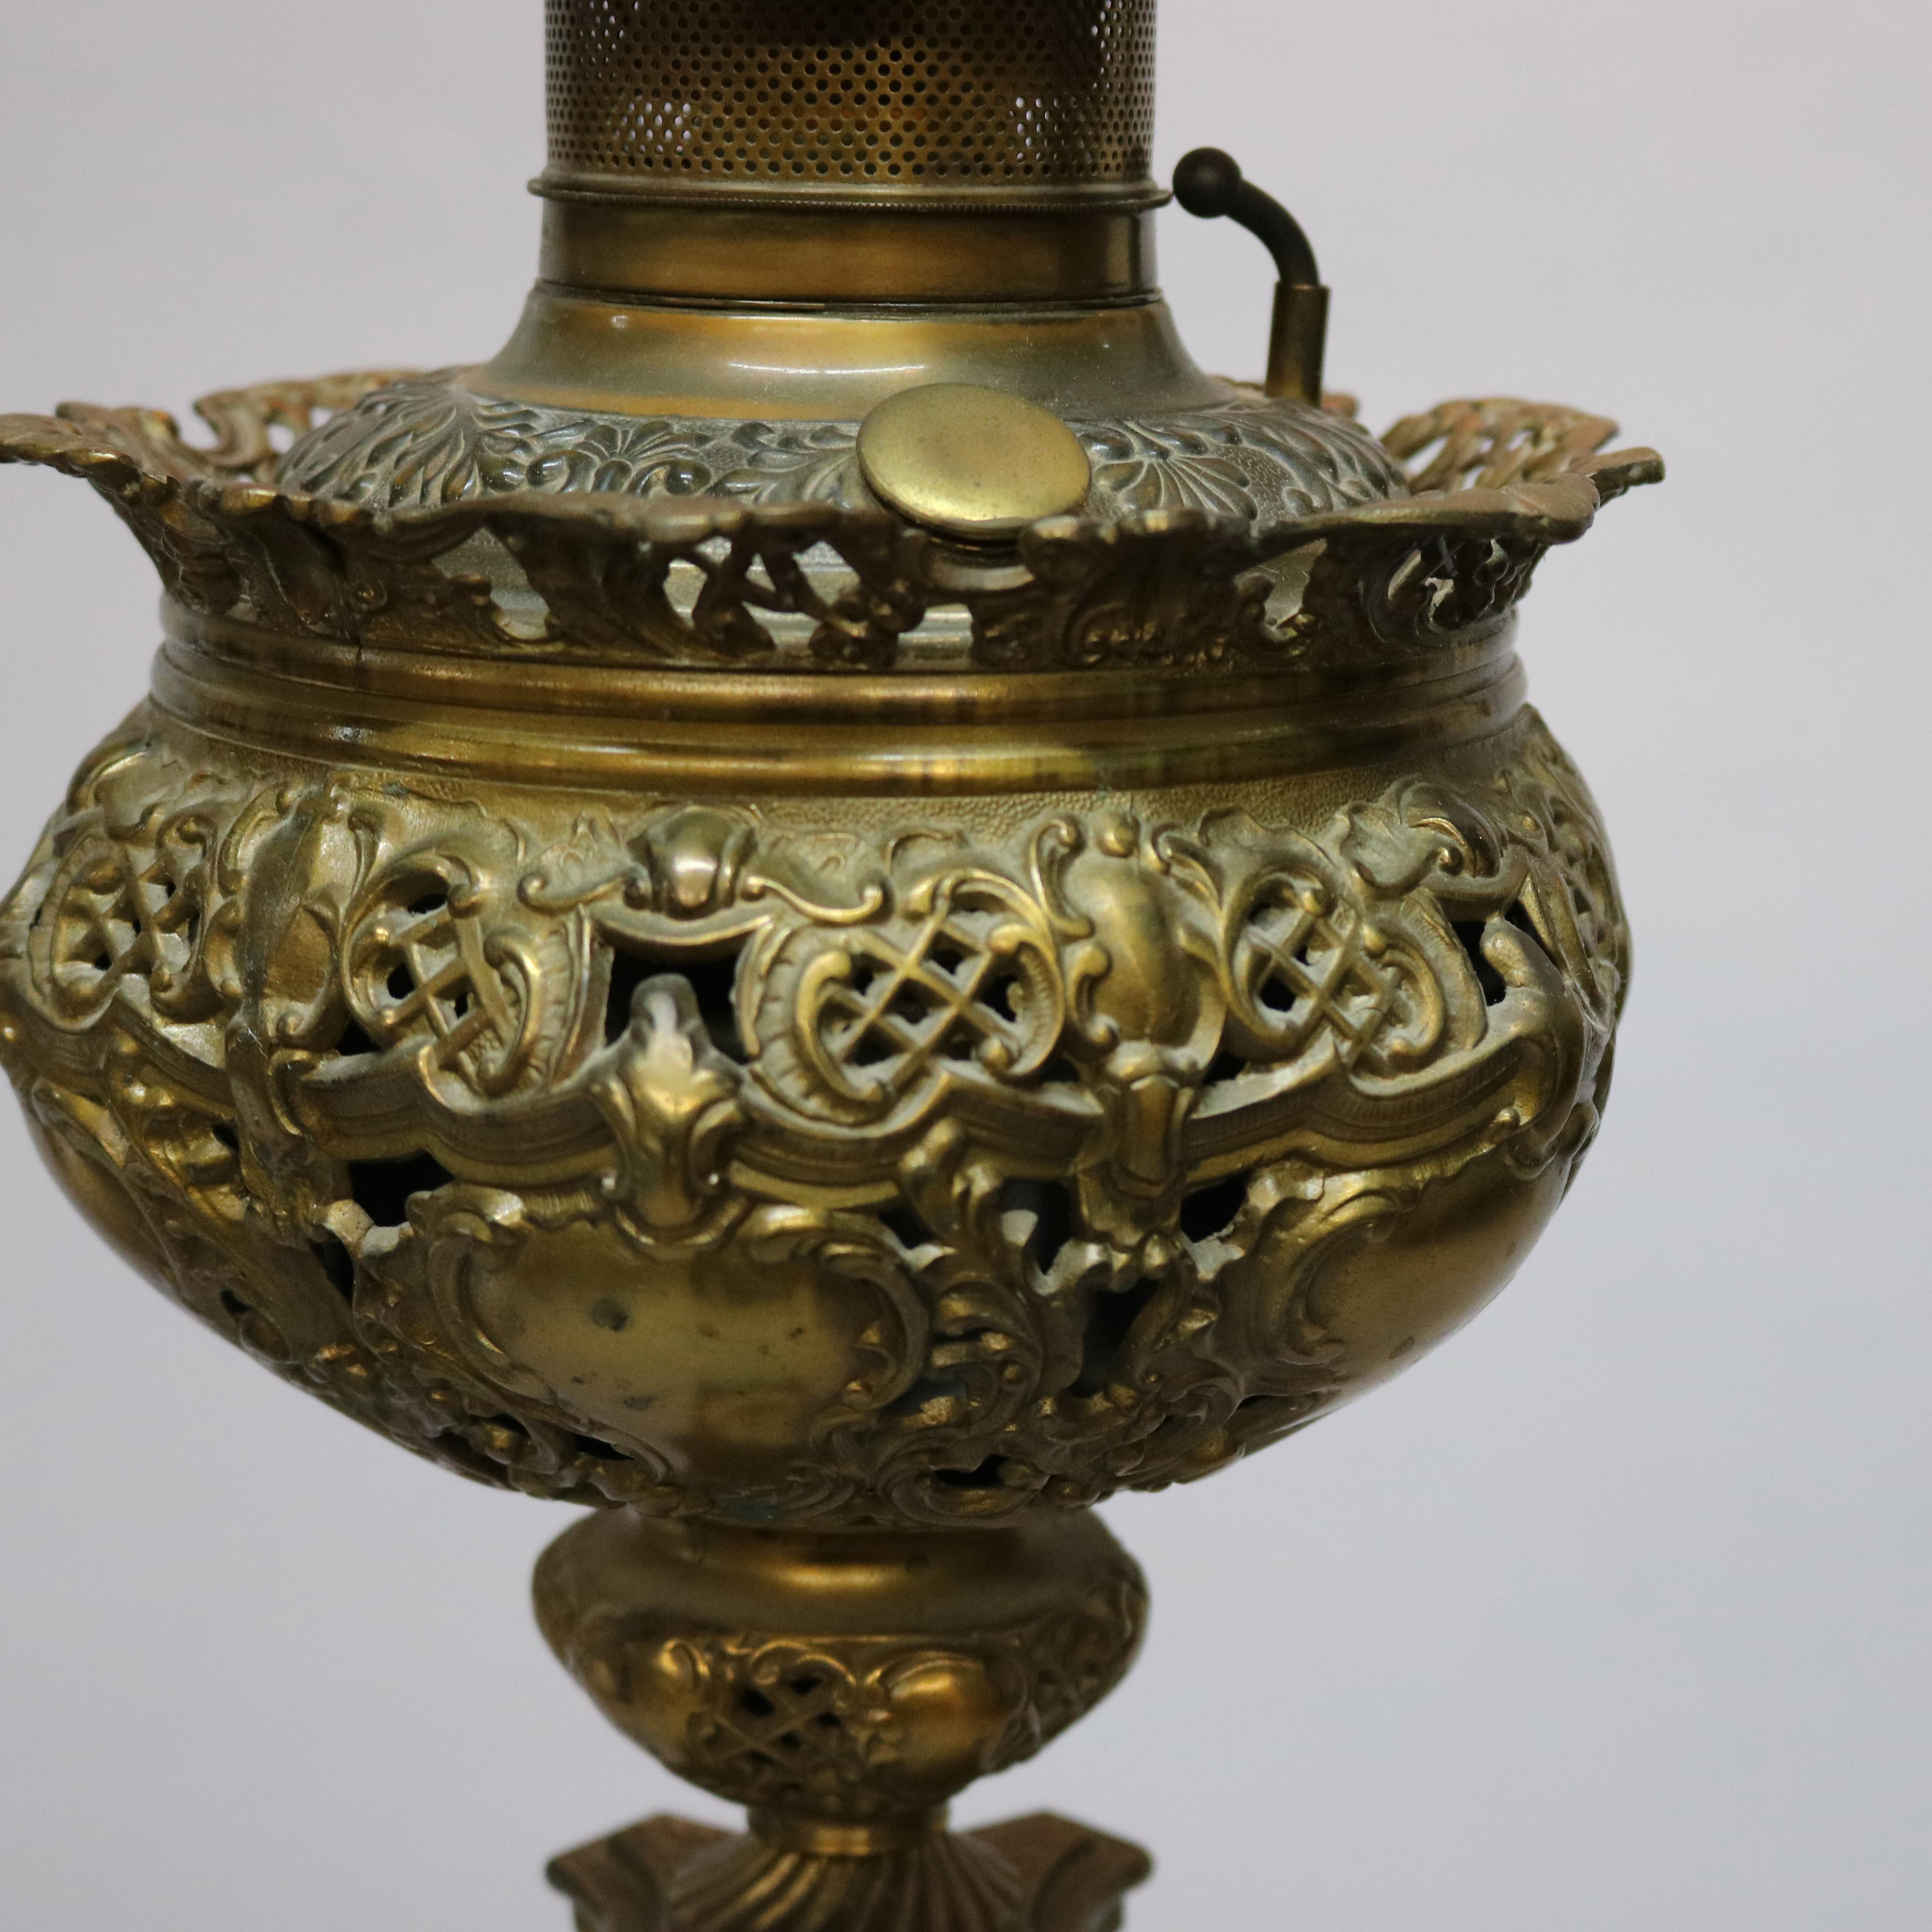 19th Century Antique Victorian Rococo Gilt & Onyx Parlor Lamp with Hand Painted Shade, c1890